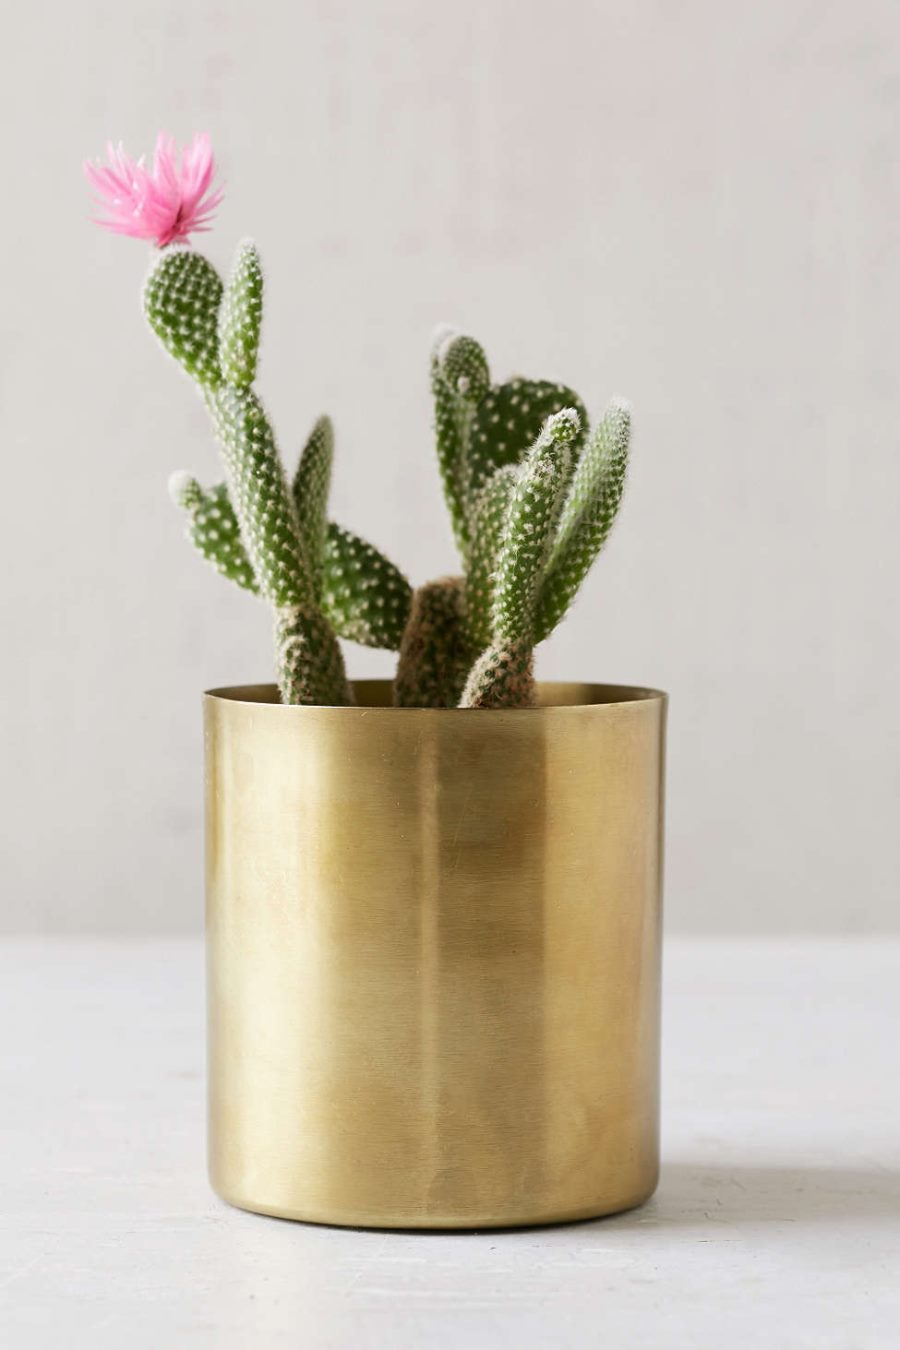 Flowering cactus in a metal planter from Urban Outfitters